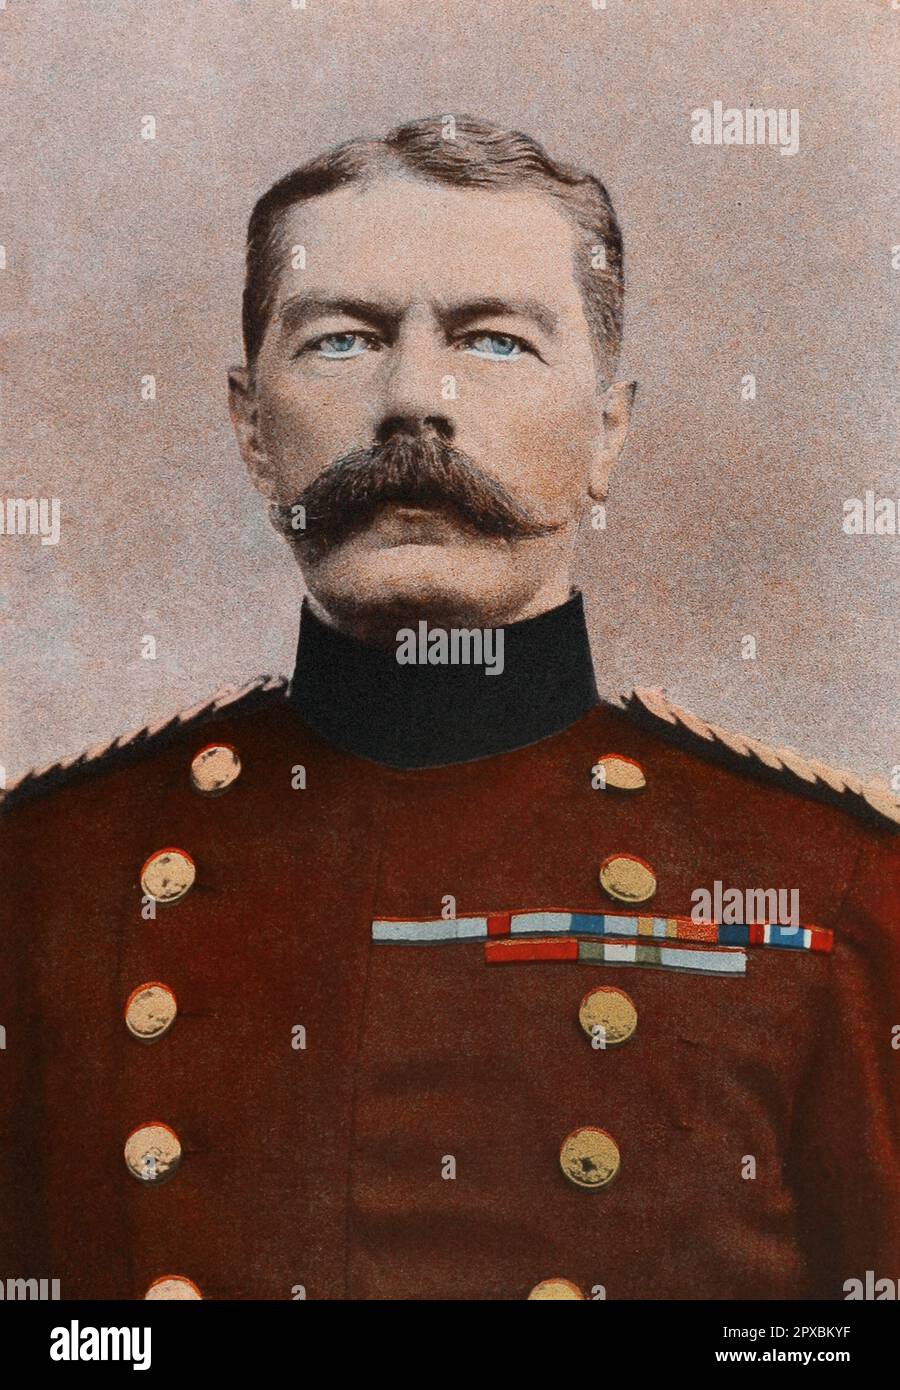 Herbert Kitchener, 1st Earl Kitchener.  Field Marshal Horatio Herbert Kitchener, 1st Earl Kitchener (1850–1916) was a senior British Army officer and colonial administrator. Kitchener came to prominence for his imperial campaigns, his involvement in the Second Boer War, and his central role in the early part of the First World War. Stock Photo